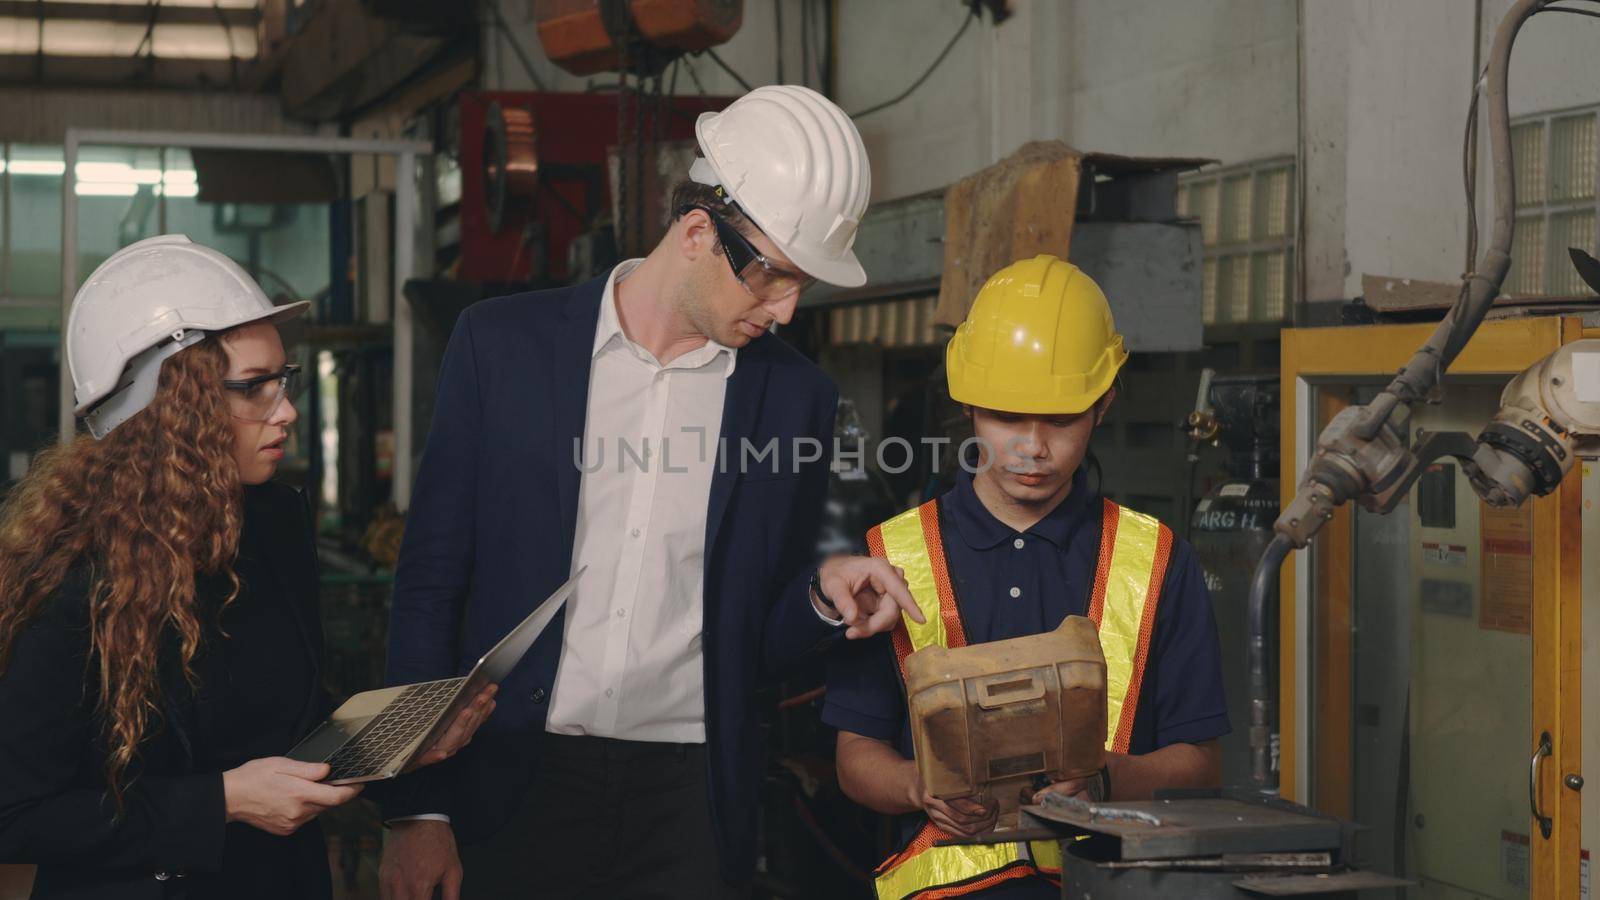 Three heavy industry business engineering in hardhats discuss information on laptop computer while standing indoors welding manufacturing industrial for check and control automated programming